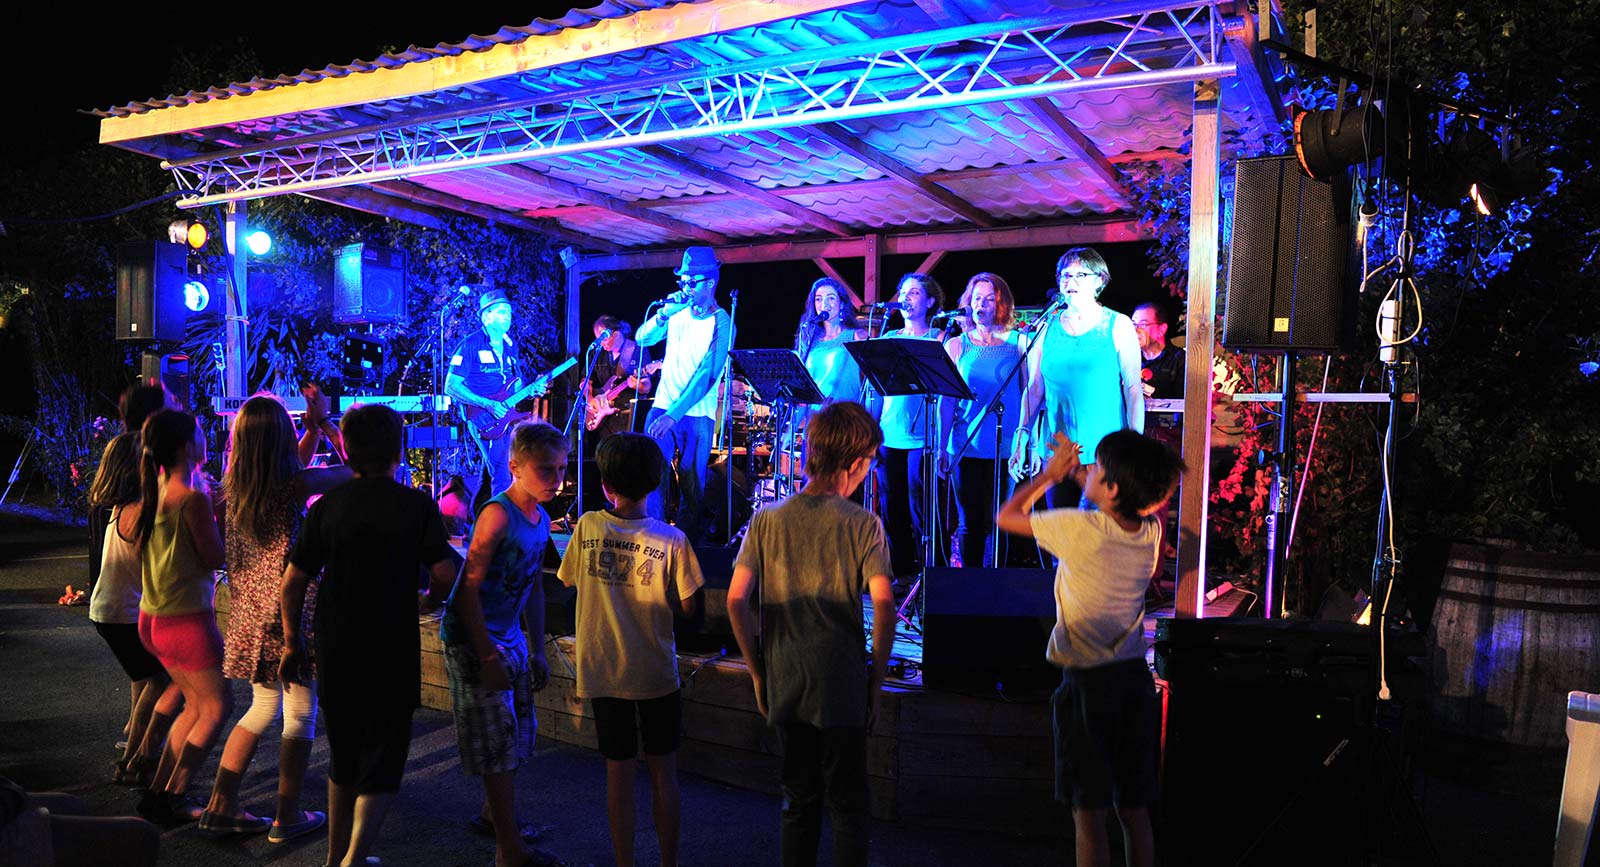 Campers and music group during a lively evening at the campsite in Oléron